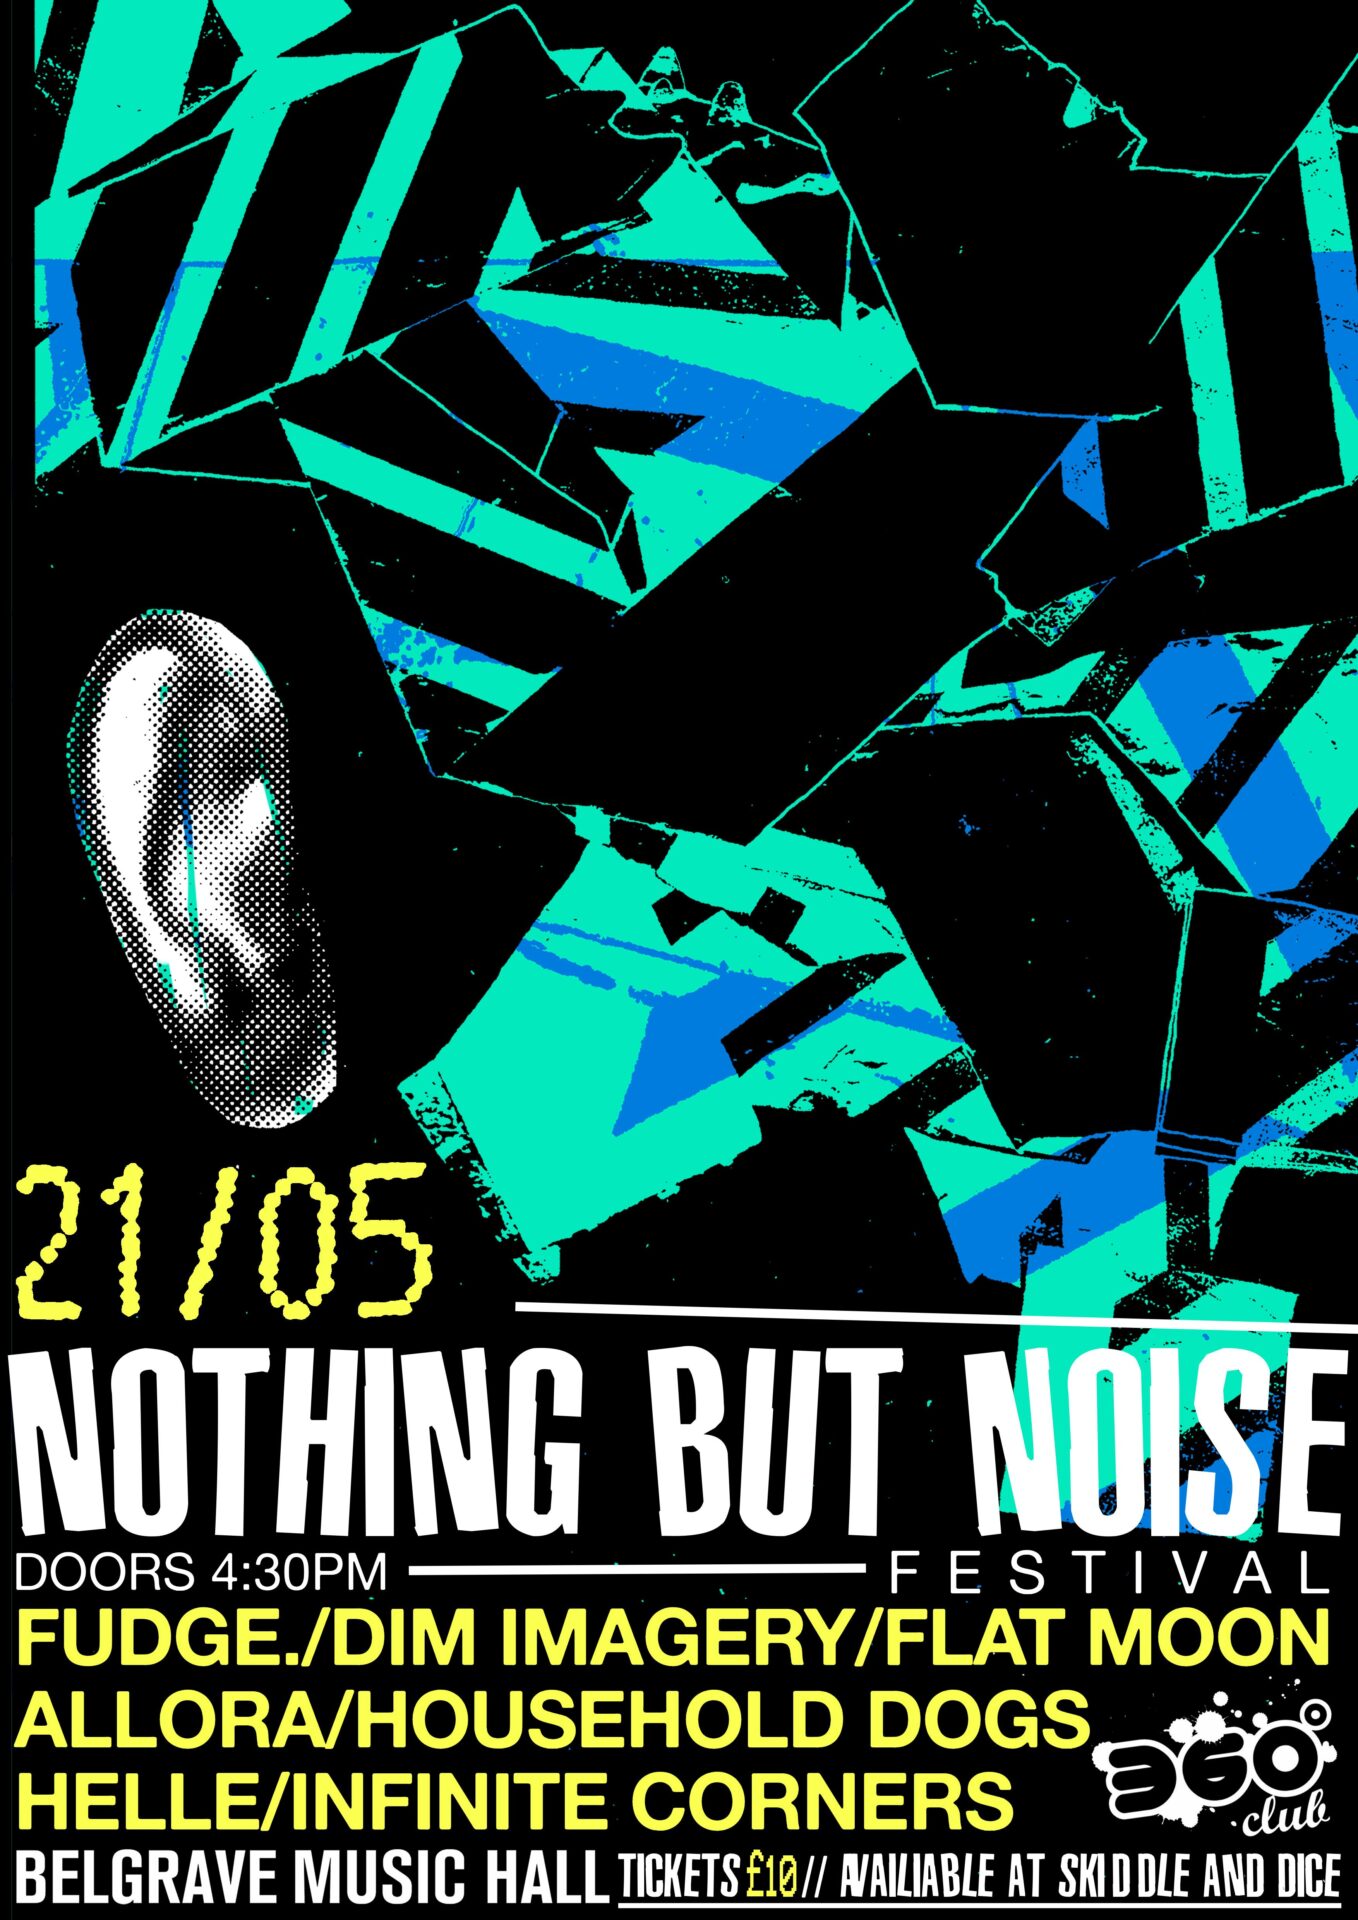 PREVIEW: Nothing But Noise Festival